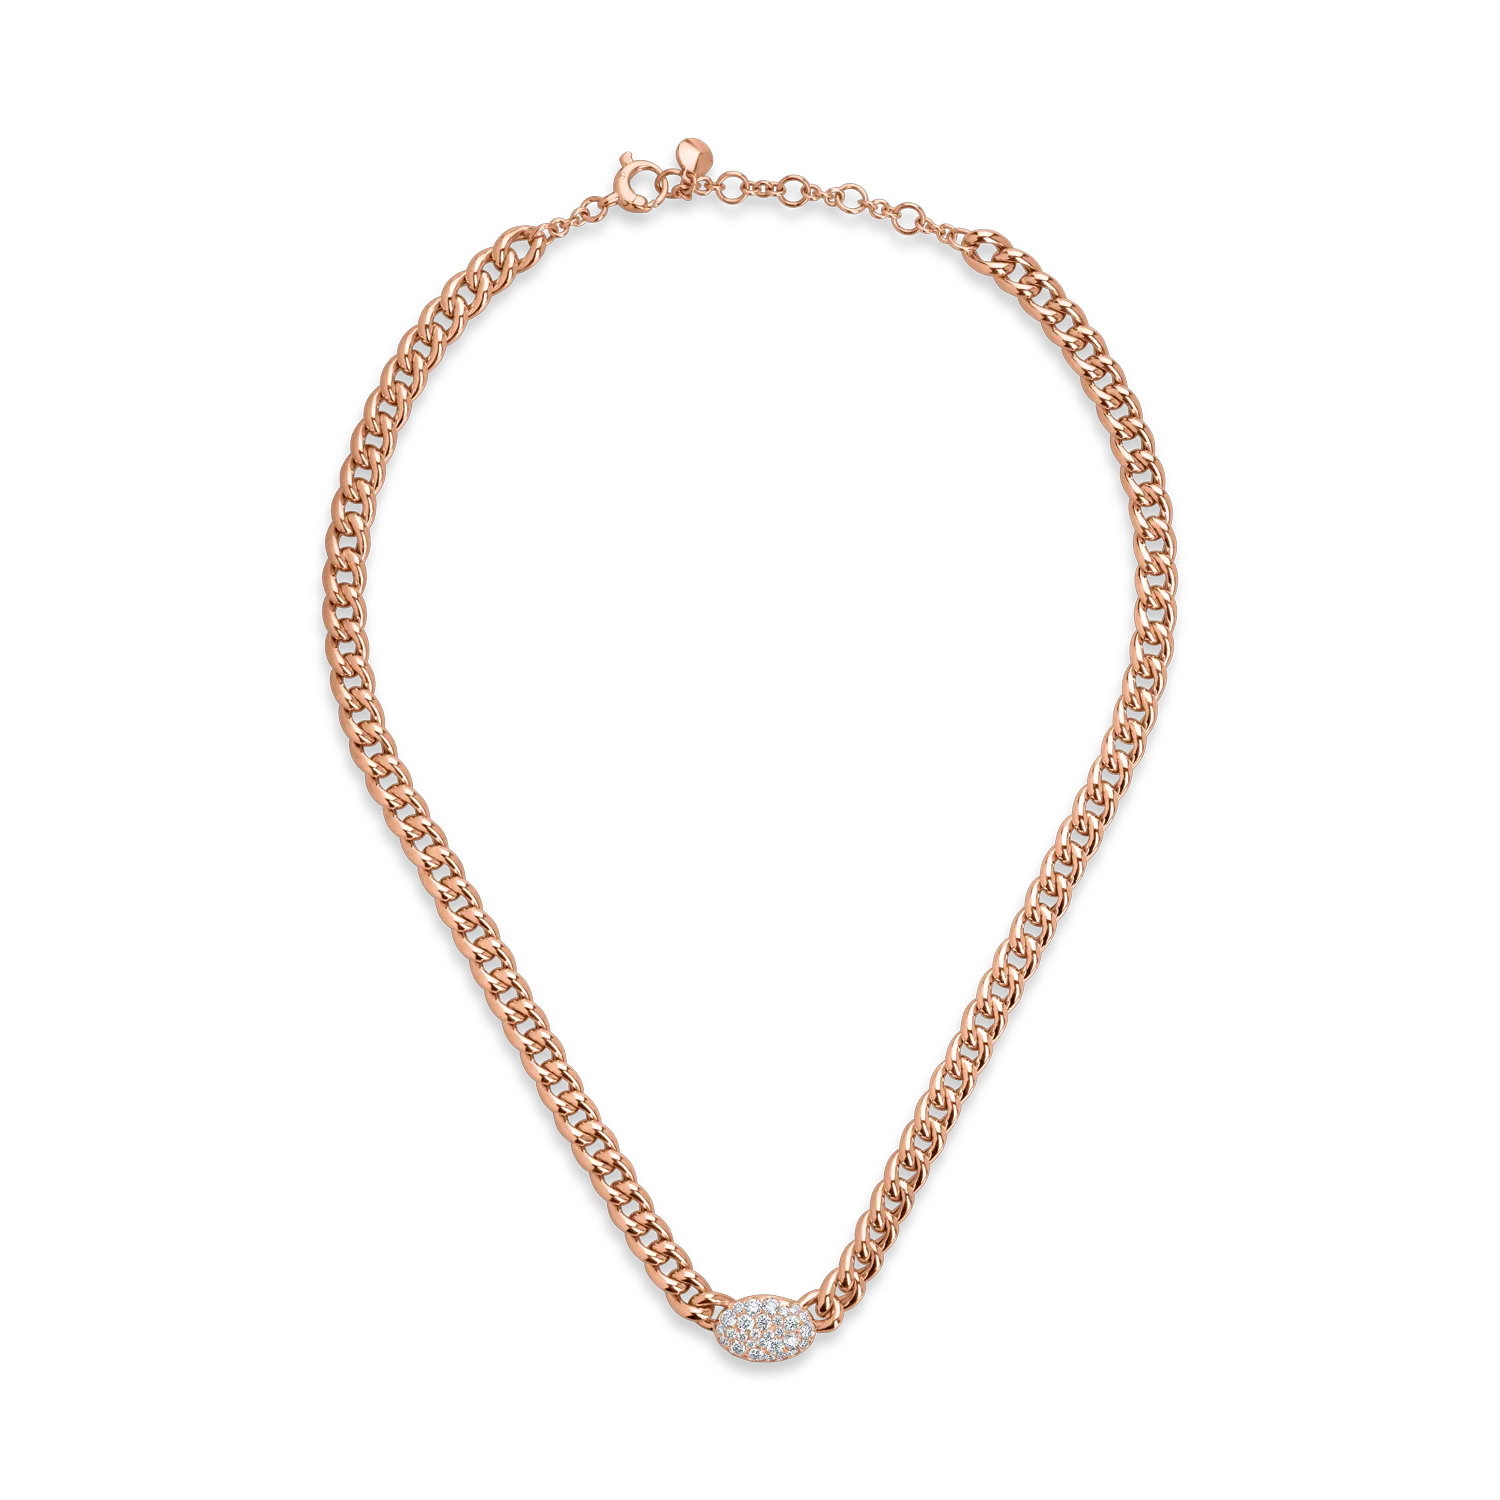 Rose gold pendant necklace with 0.7ct diamonds